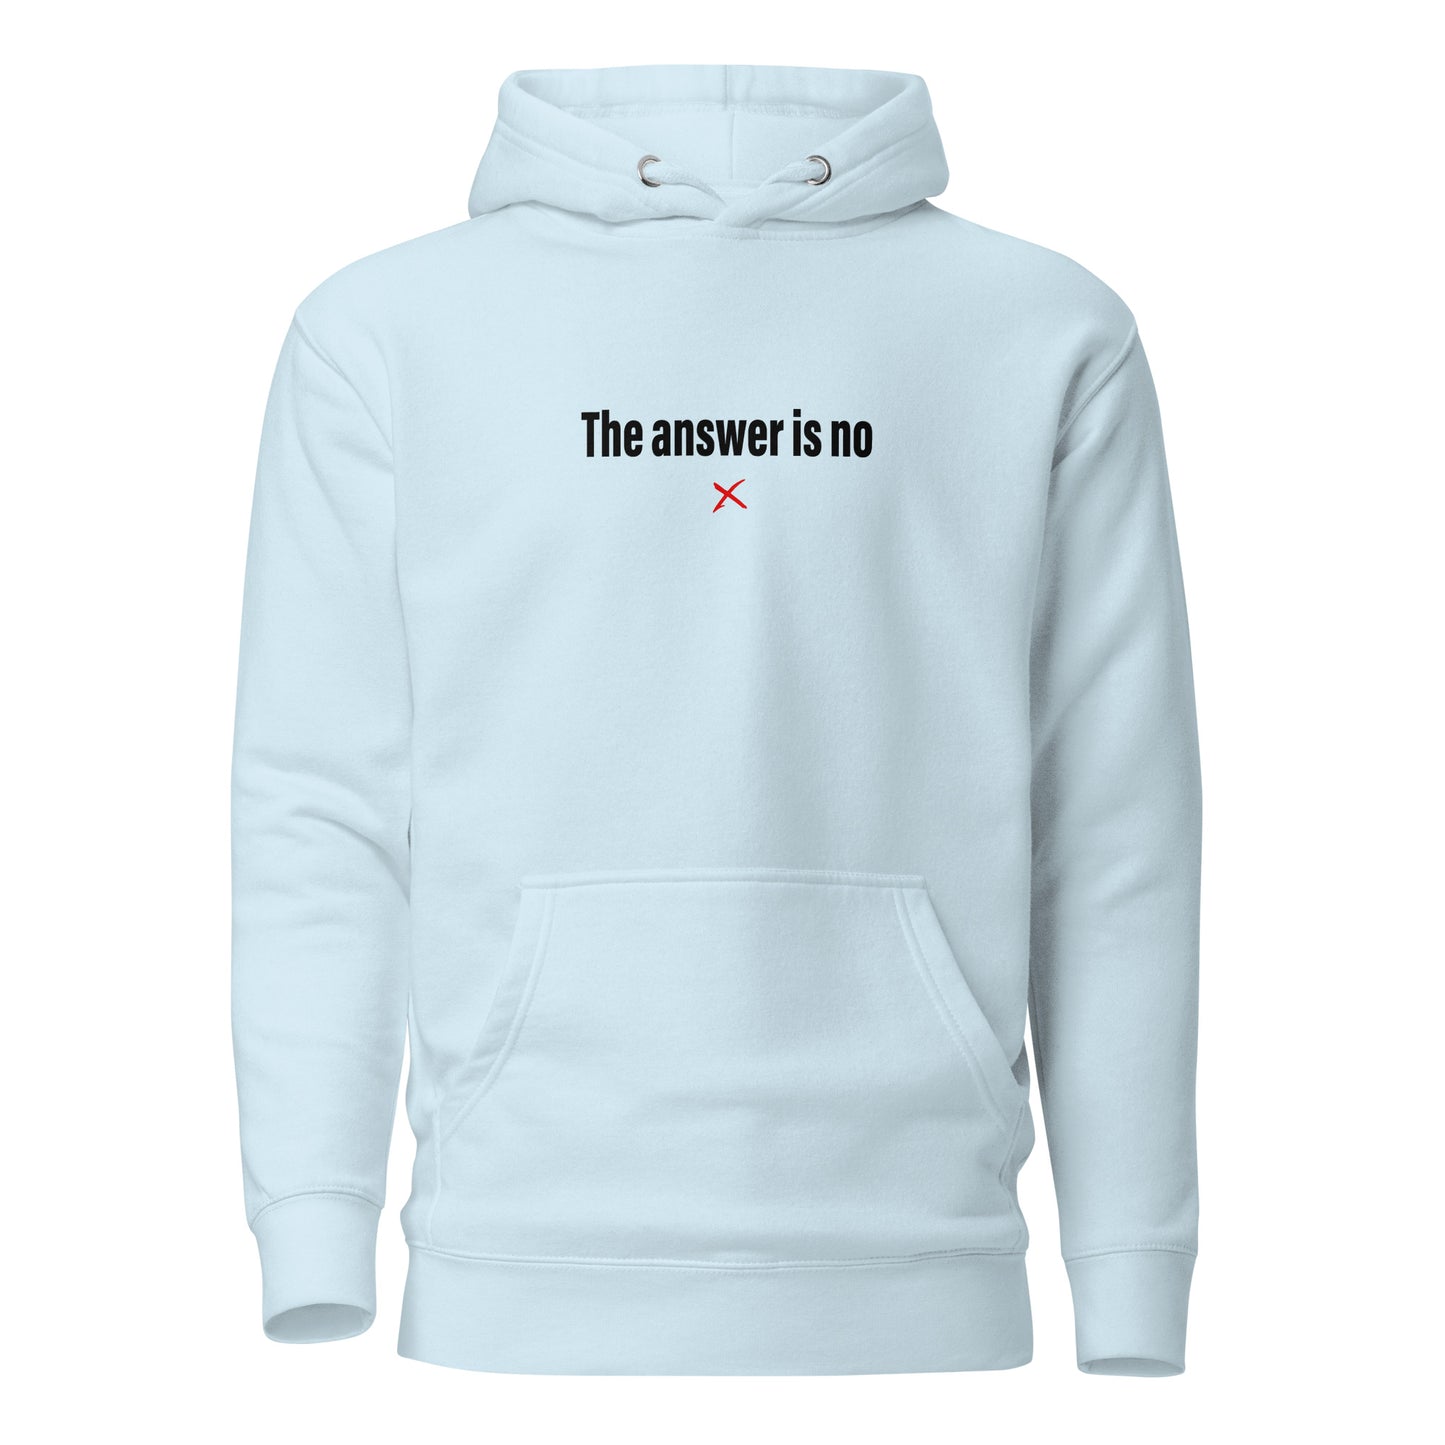 The answer is no - Hoodie